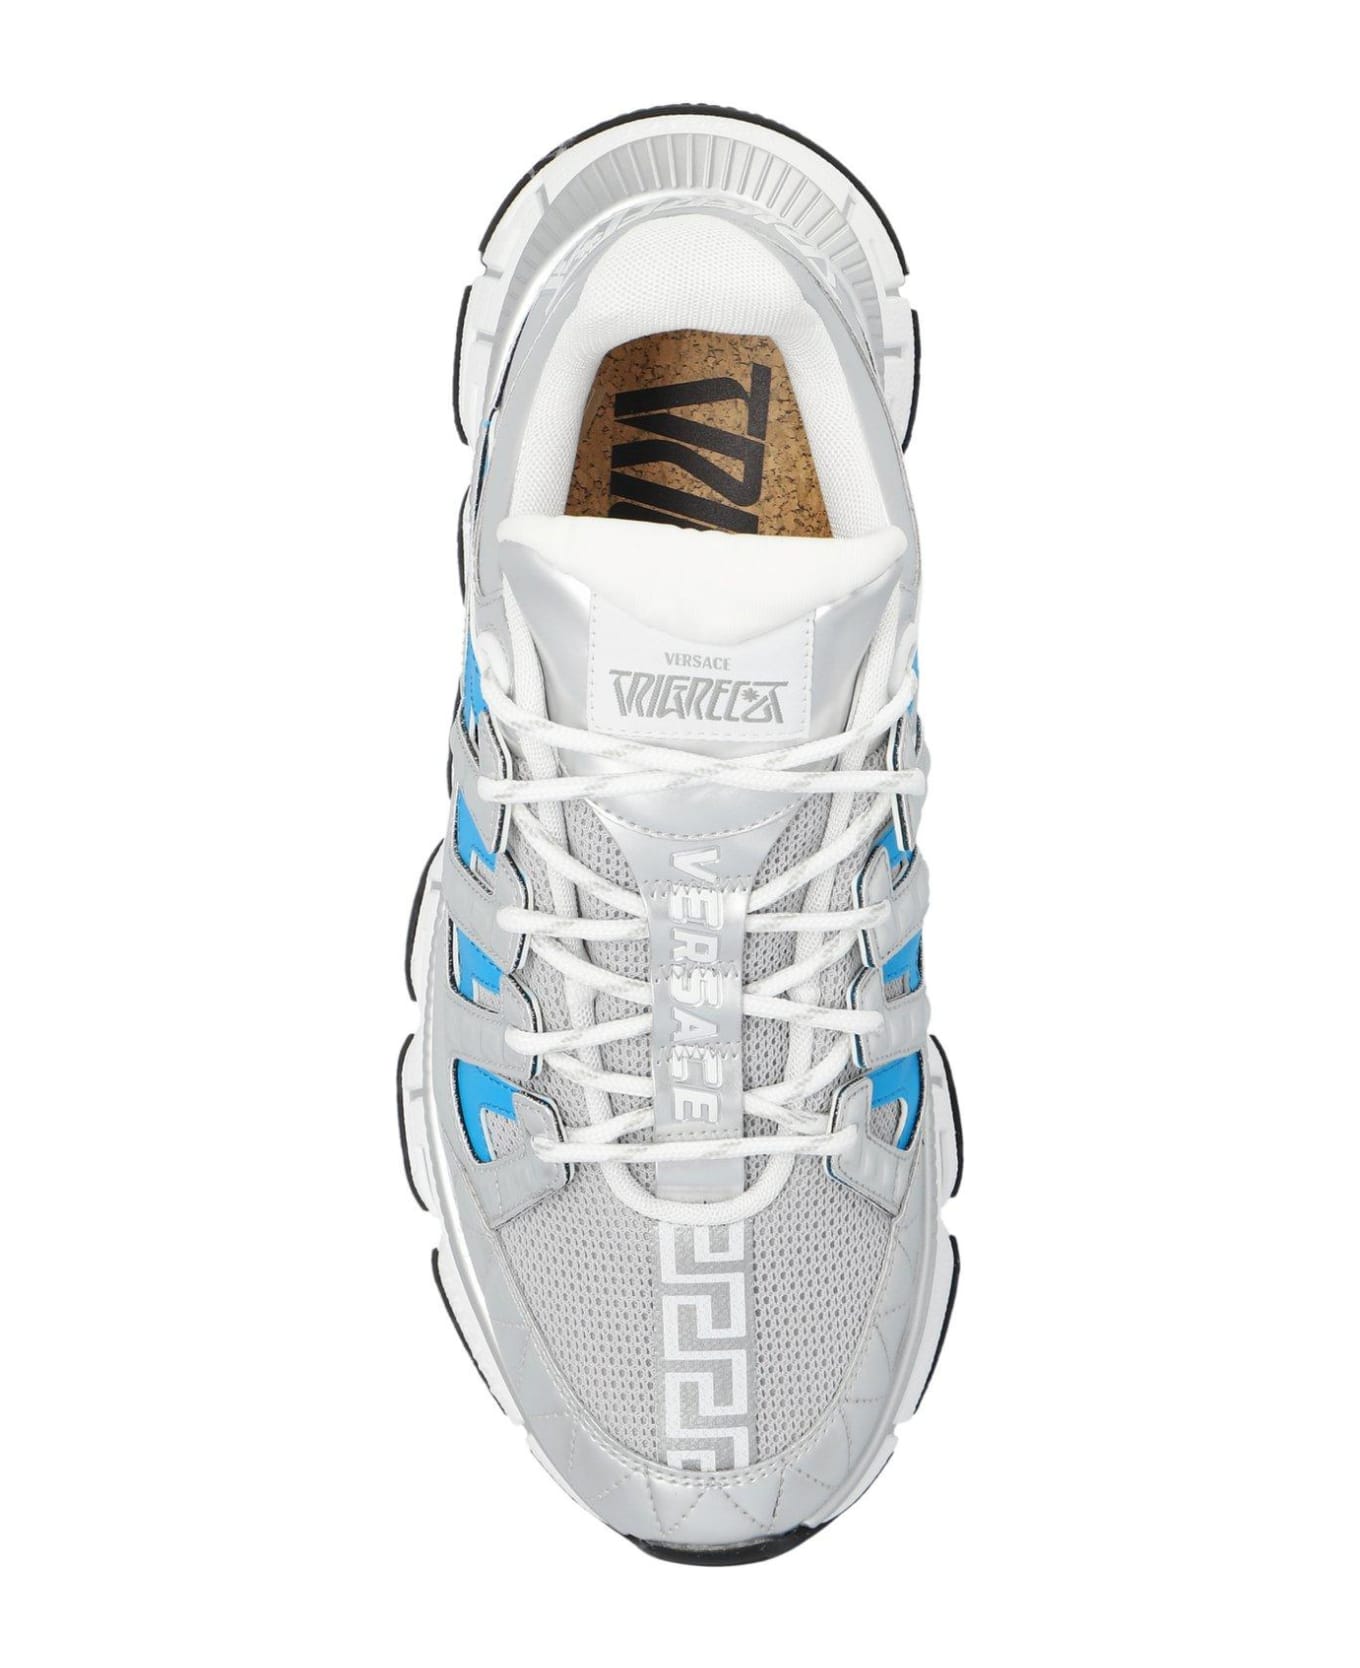 Versace Trigreca Panelled Mesh Lace-up Sneakers - Blu e Argento